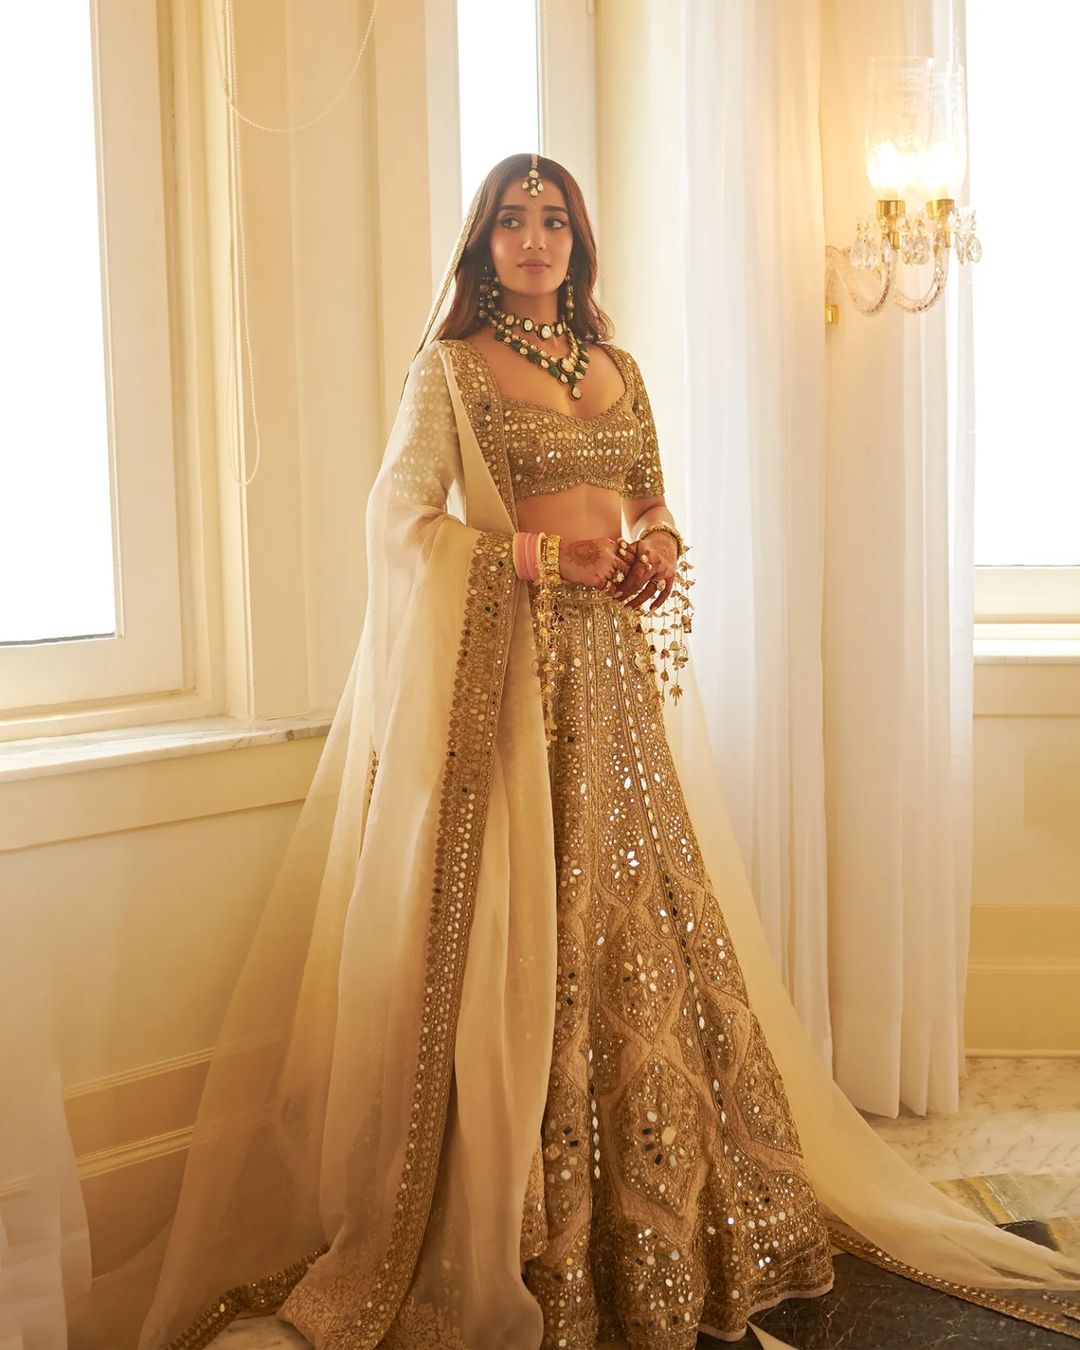 A Very Classy And Gorgeous Look Simple Neutral Tone Bridal Lehenga Designs That Are Trending